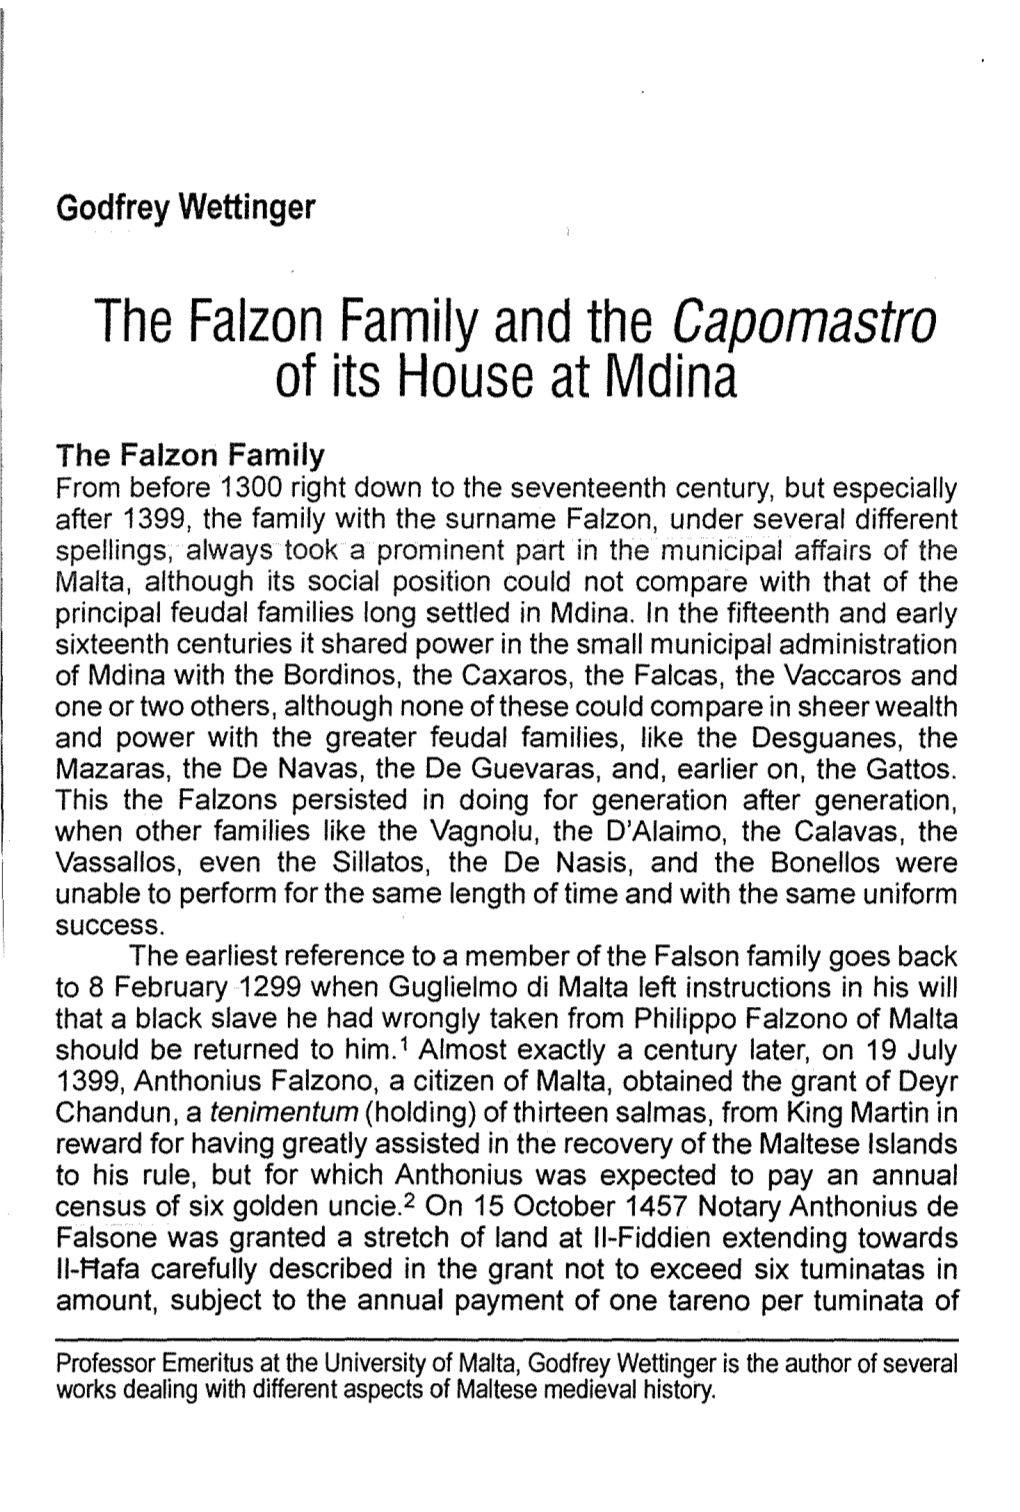 The Falzon Family and the Capomastro of Its House at Mdina